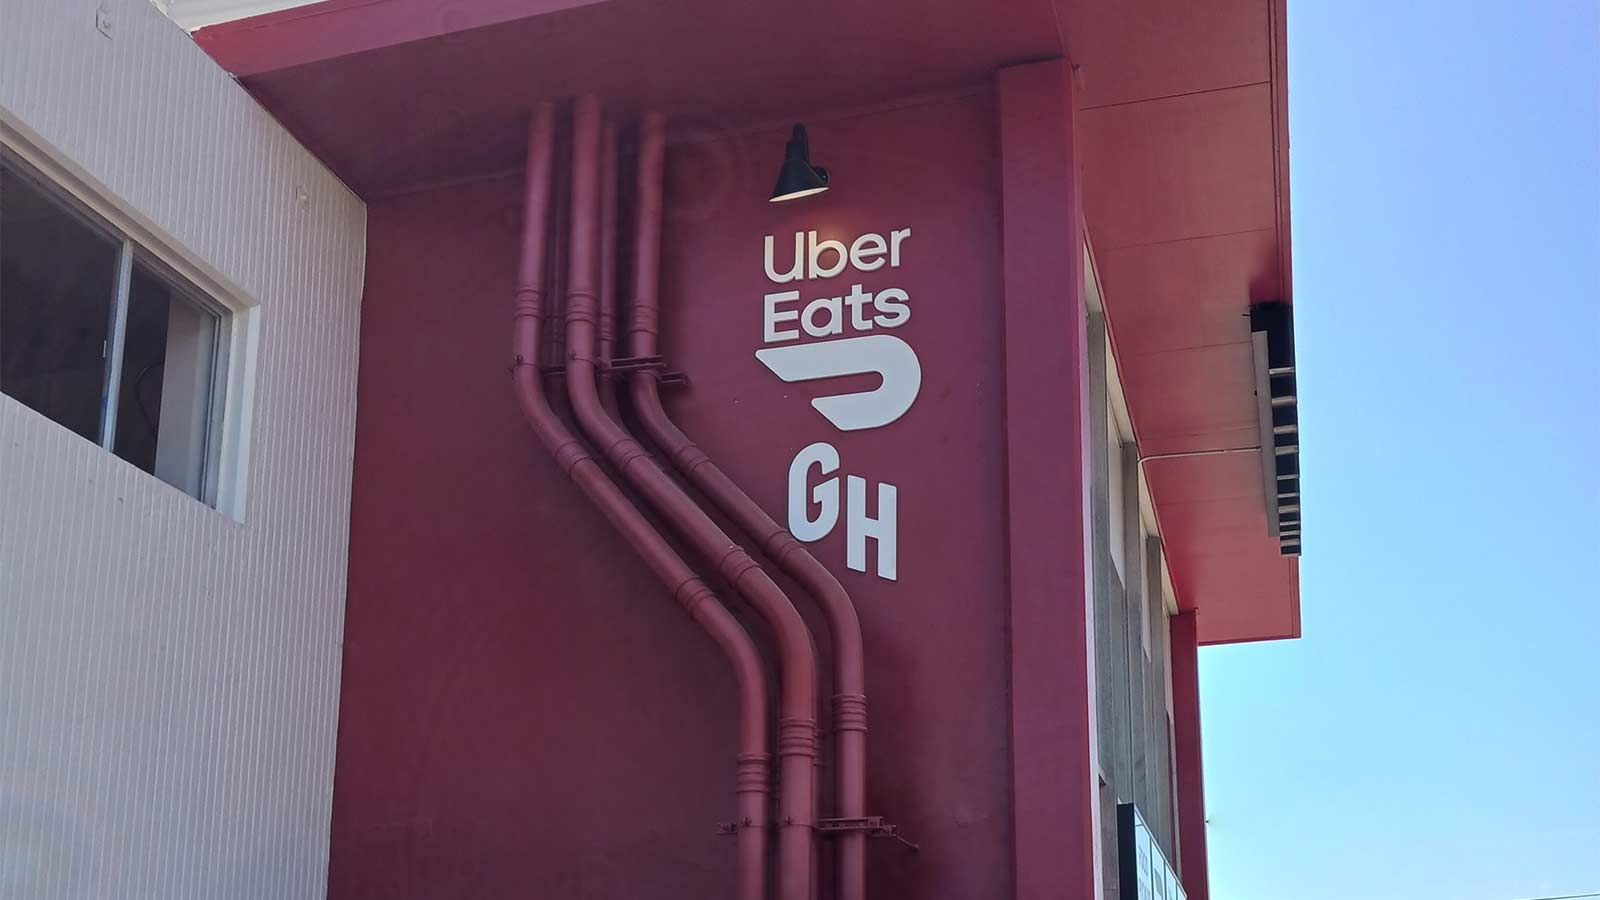 City Storage Systems for Uber Eats PVC sign on the building